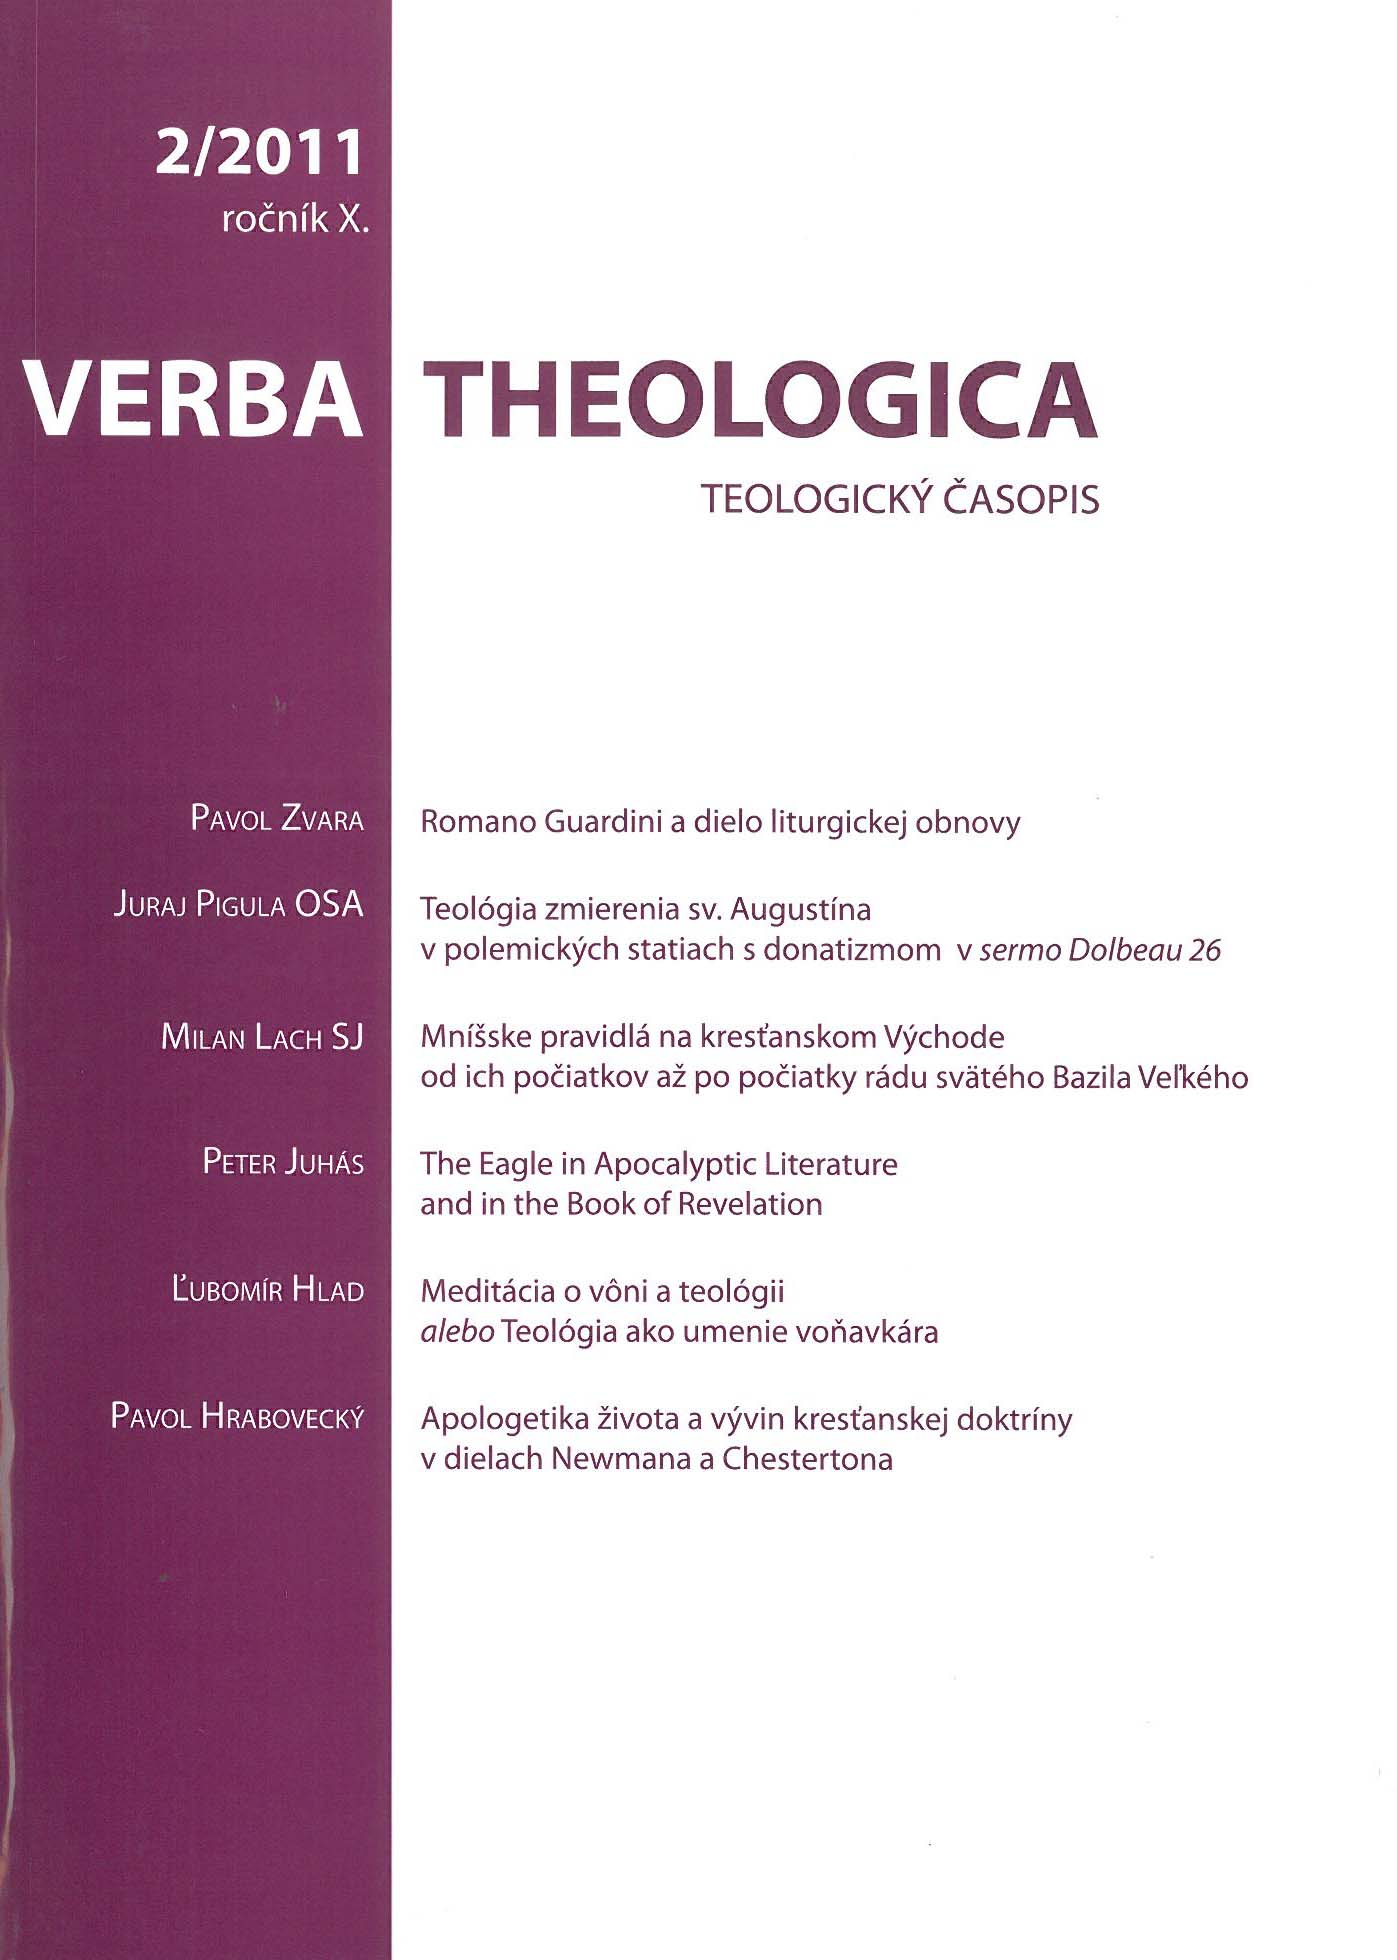 Augustine’s Theology of Reconciliation in his Polemic against Donatism in sermo Dolbeau 26 Cover Image